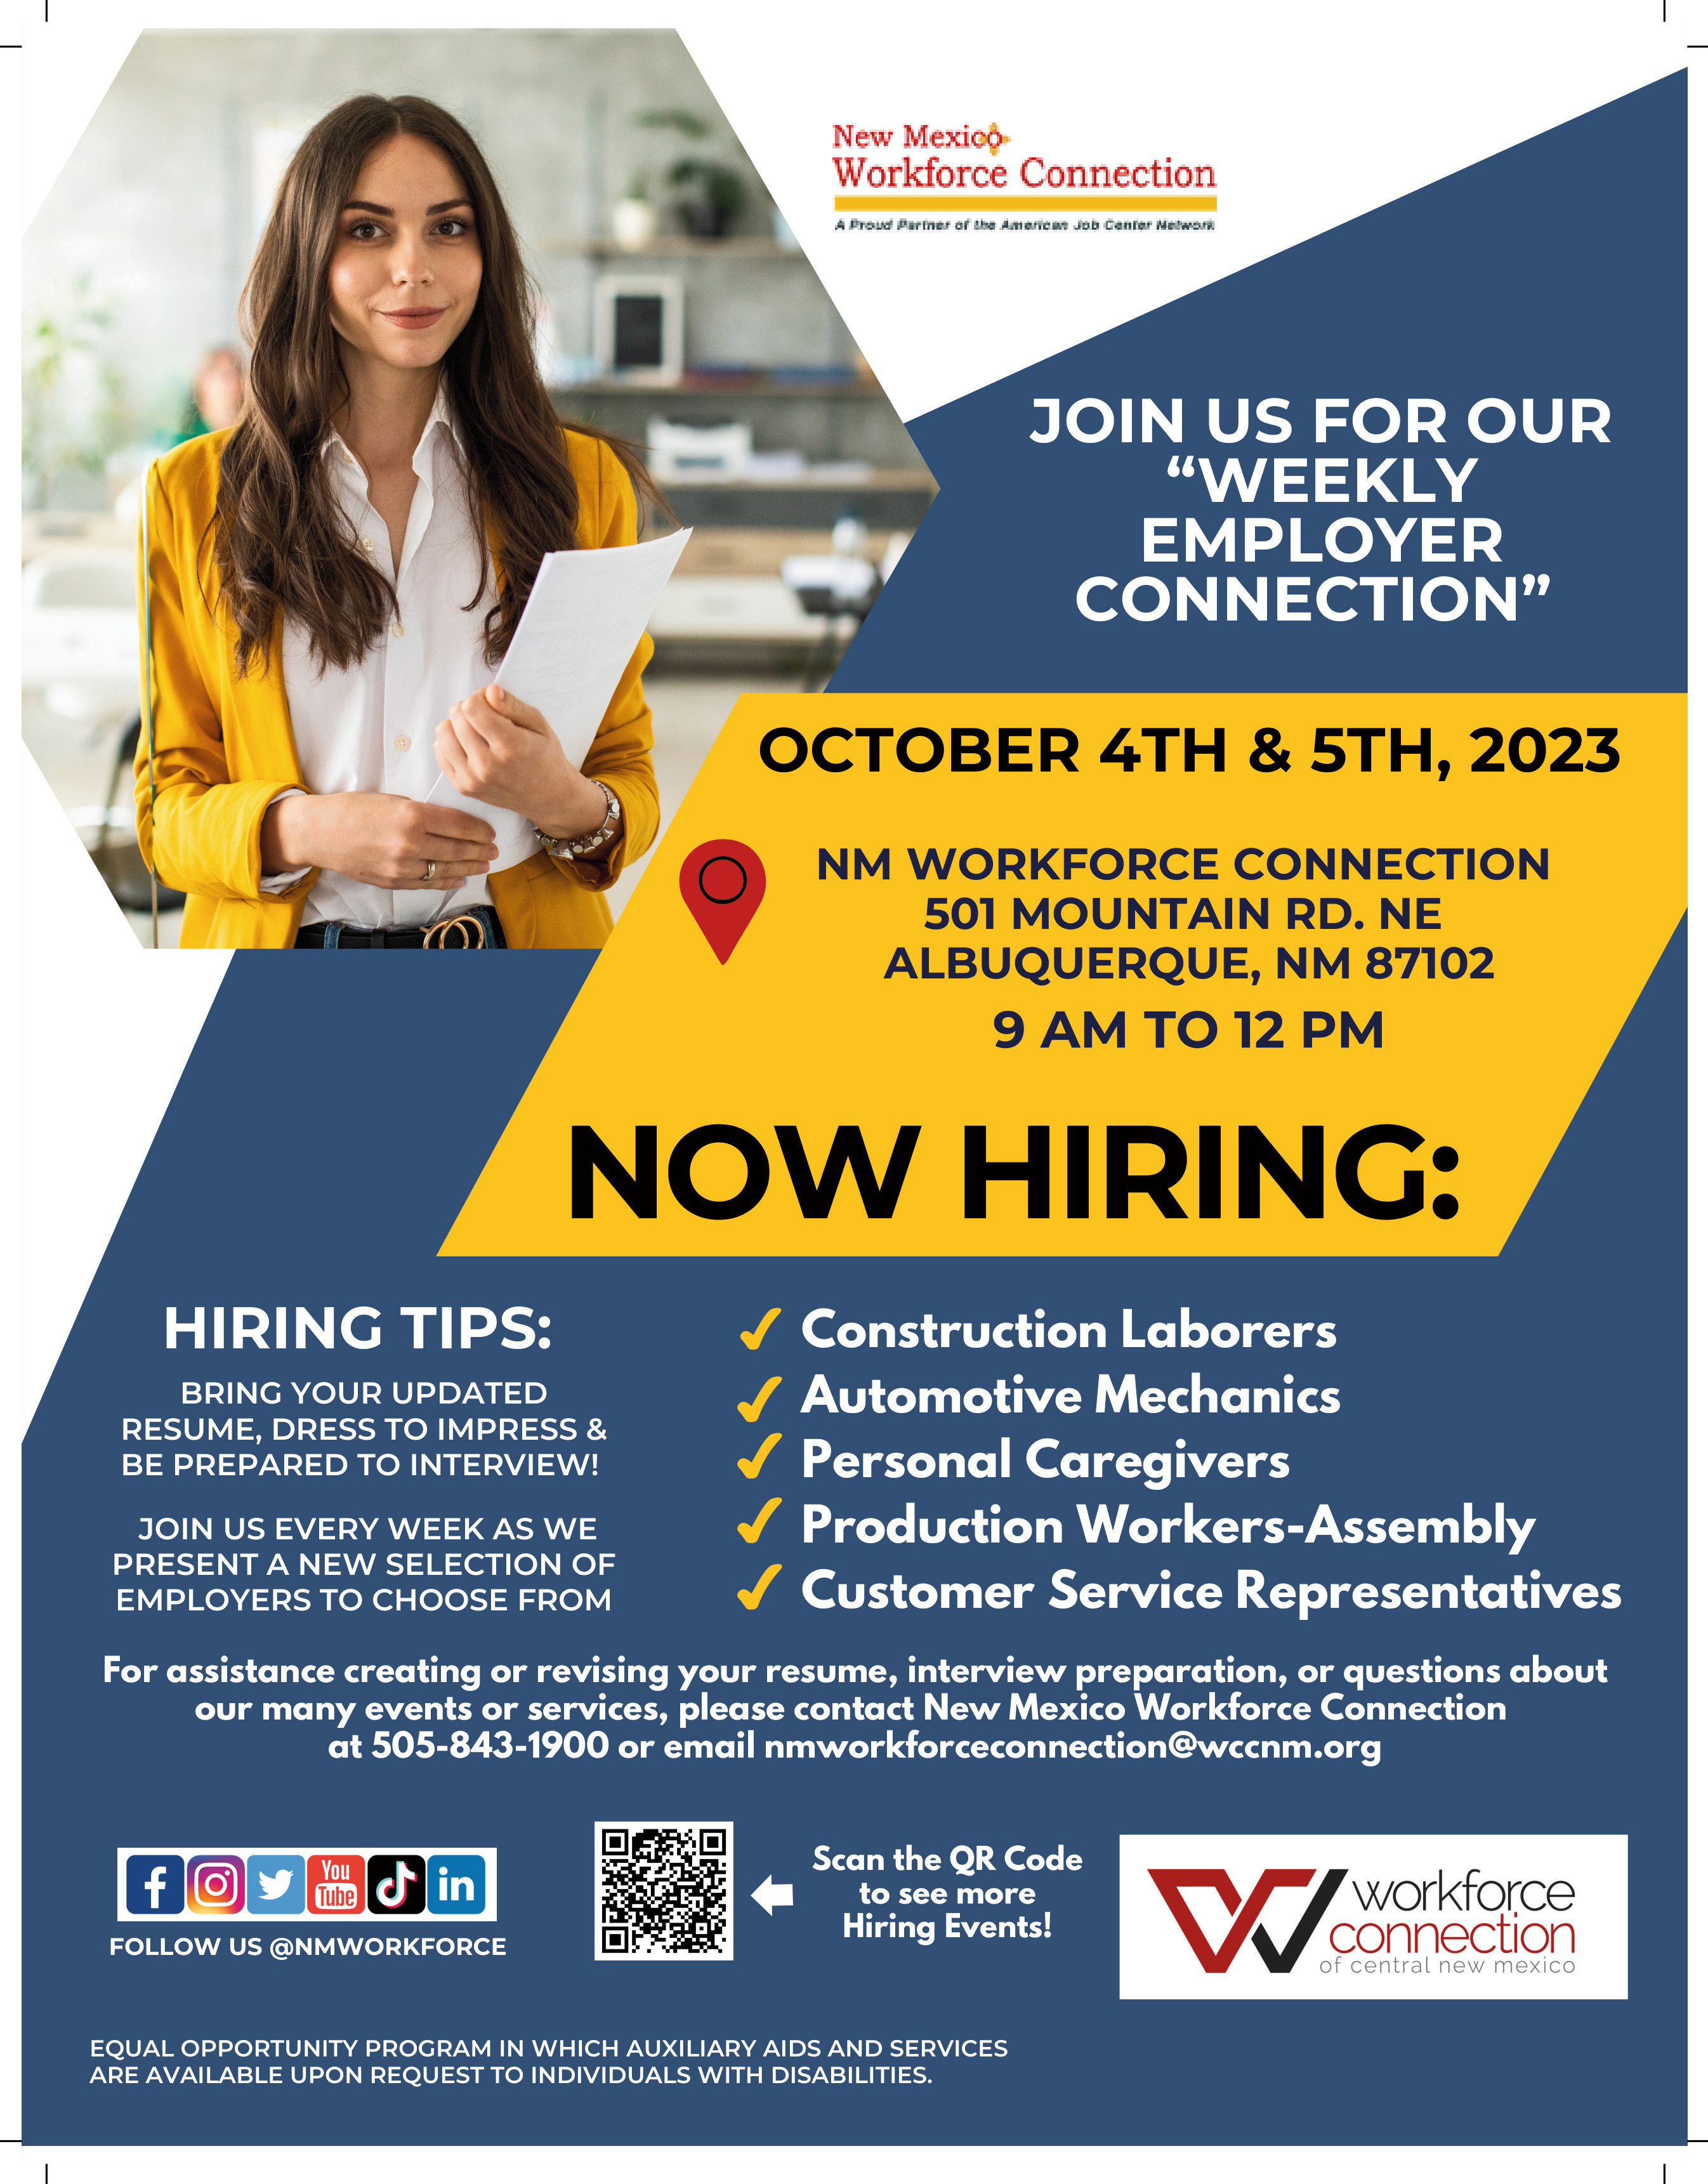 NM Workforce Connection Weekly Employer Connection flyer